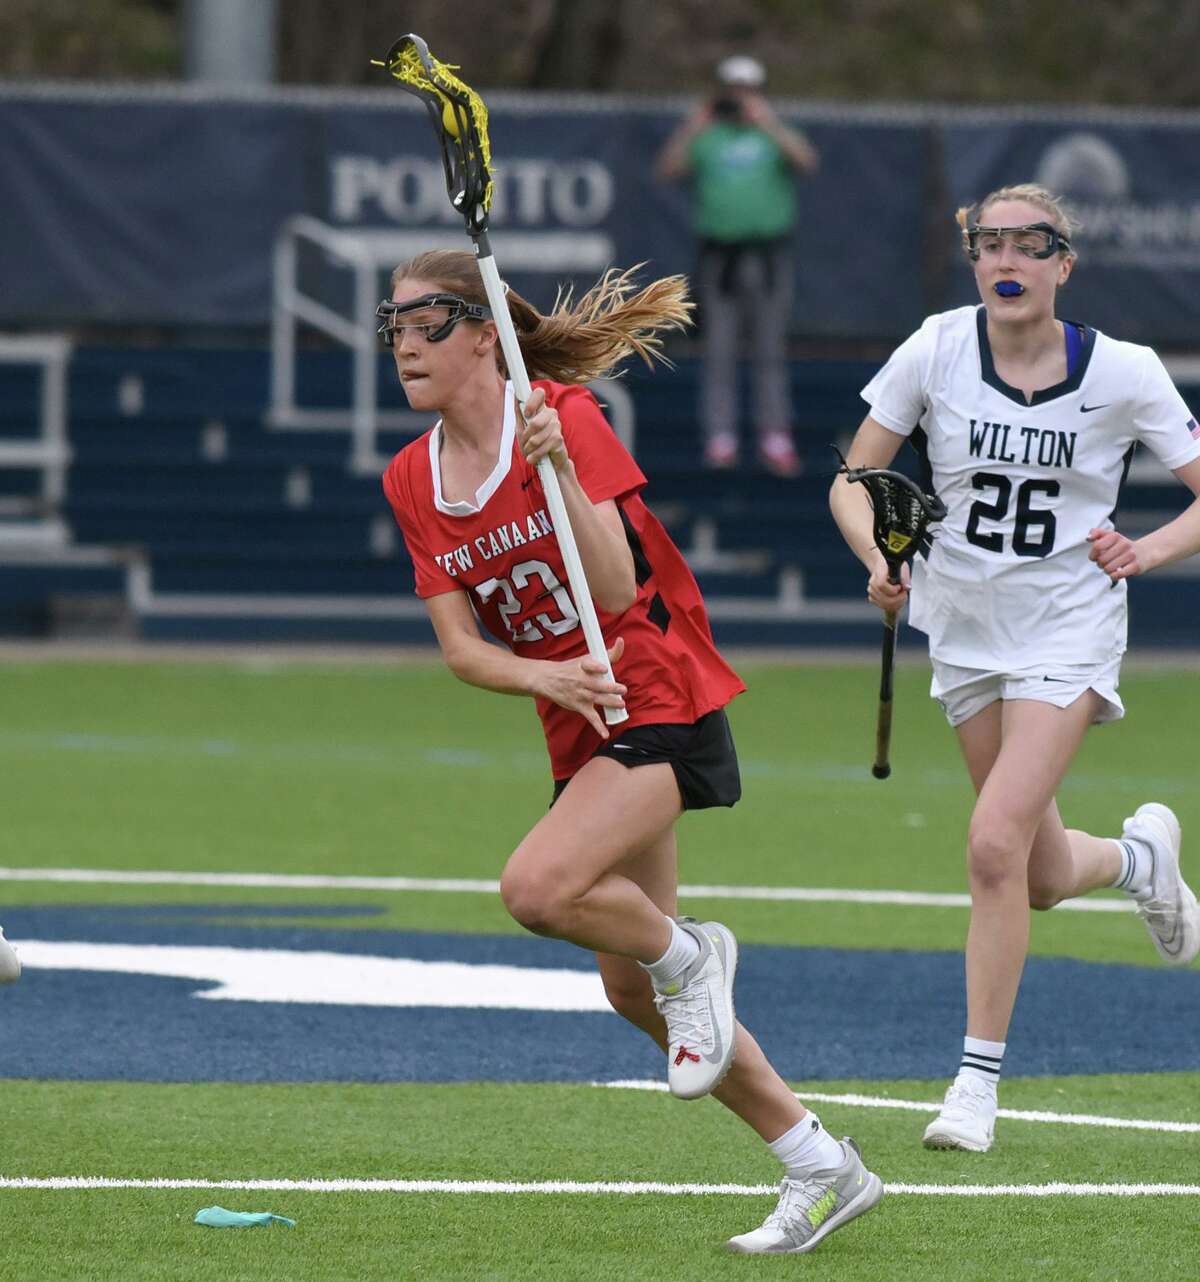 Playing for injured teammate, New Canaan dominates Wilton in girls lacrosse